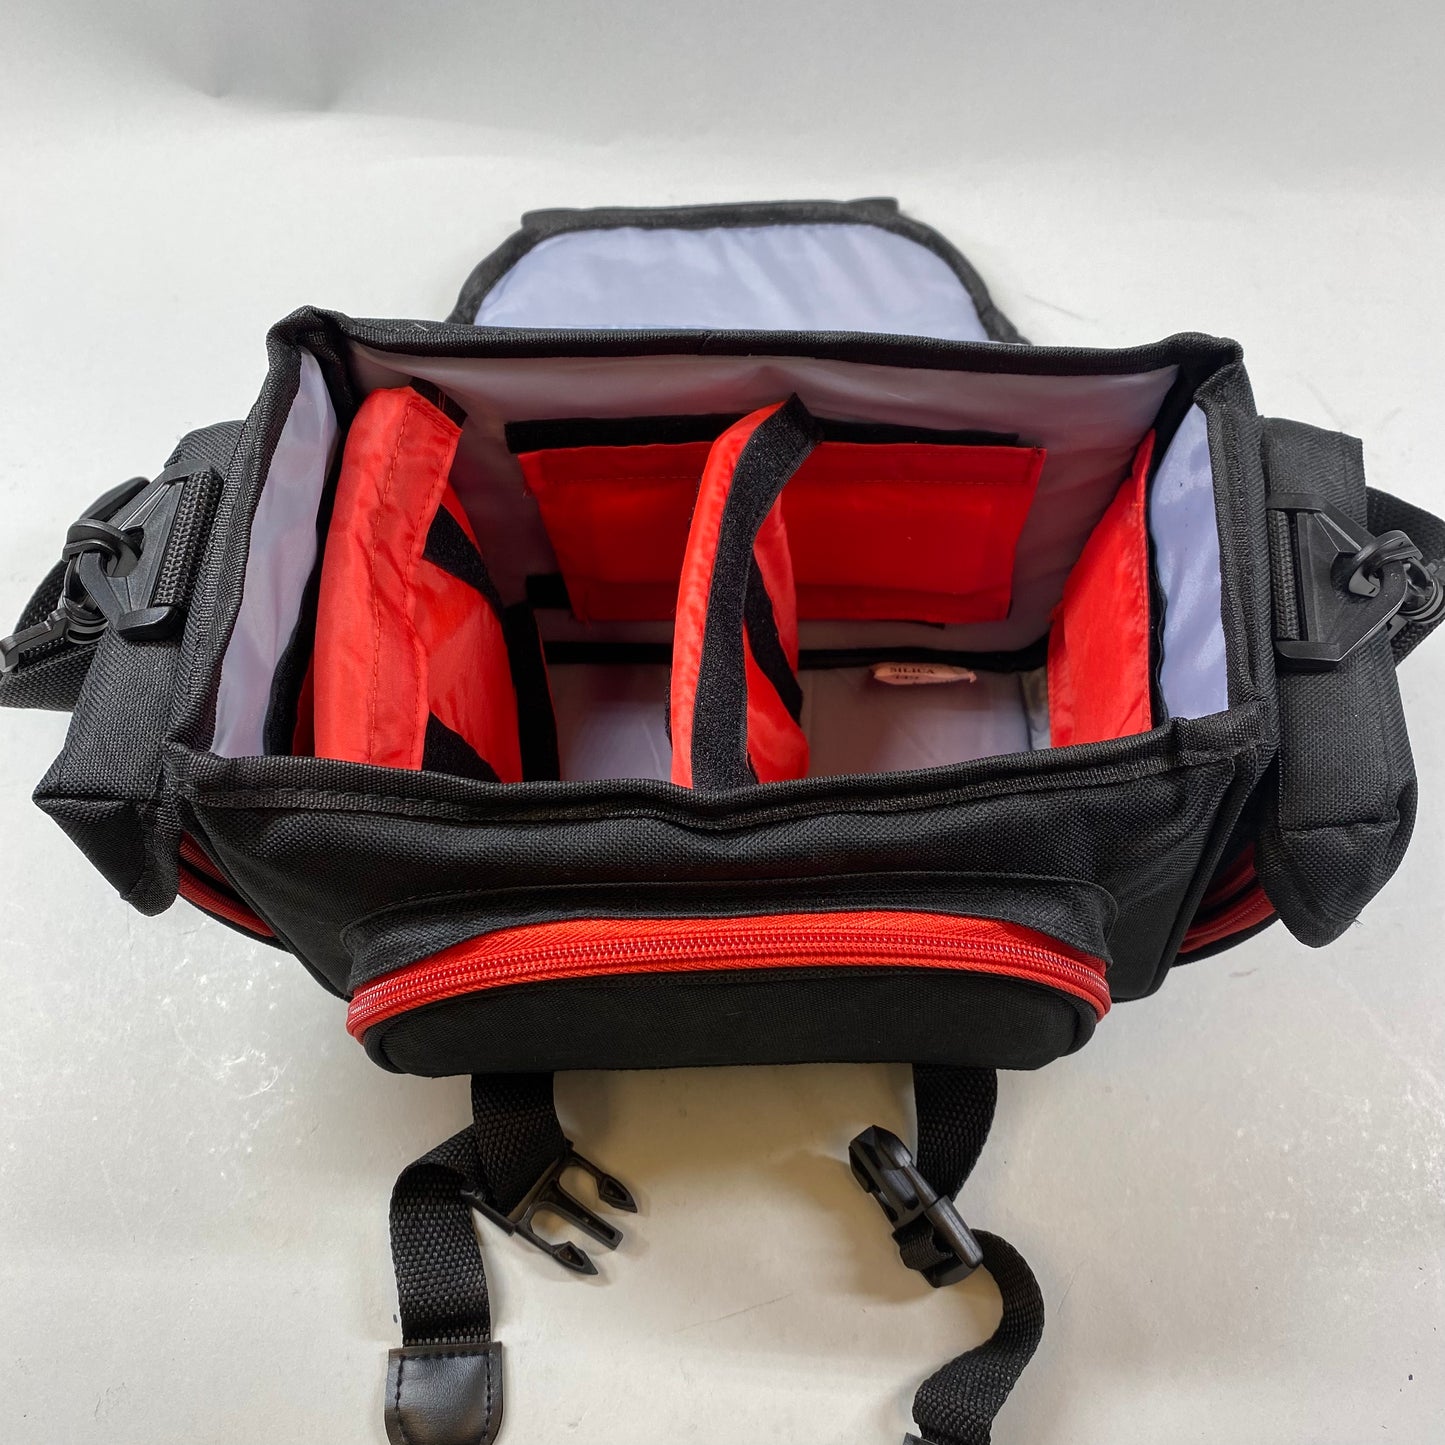 Focus Camera Bag for SLR and Video Medium, 5 inner, 3 Outer Pockets Red and Black